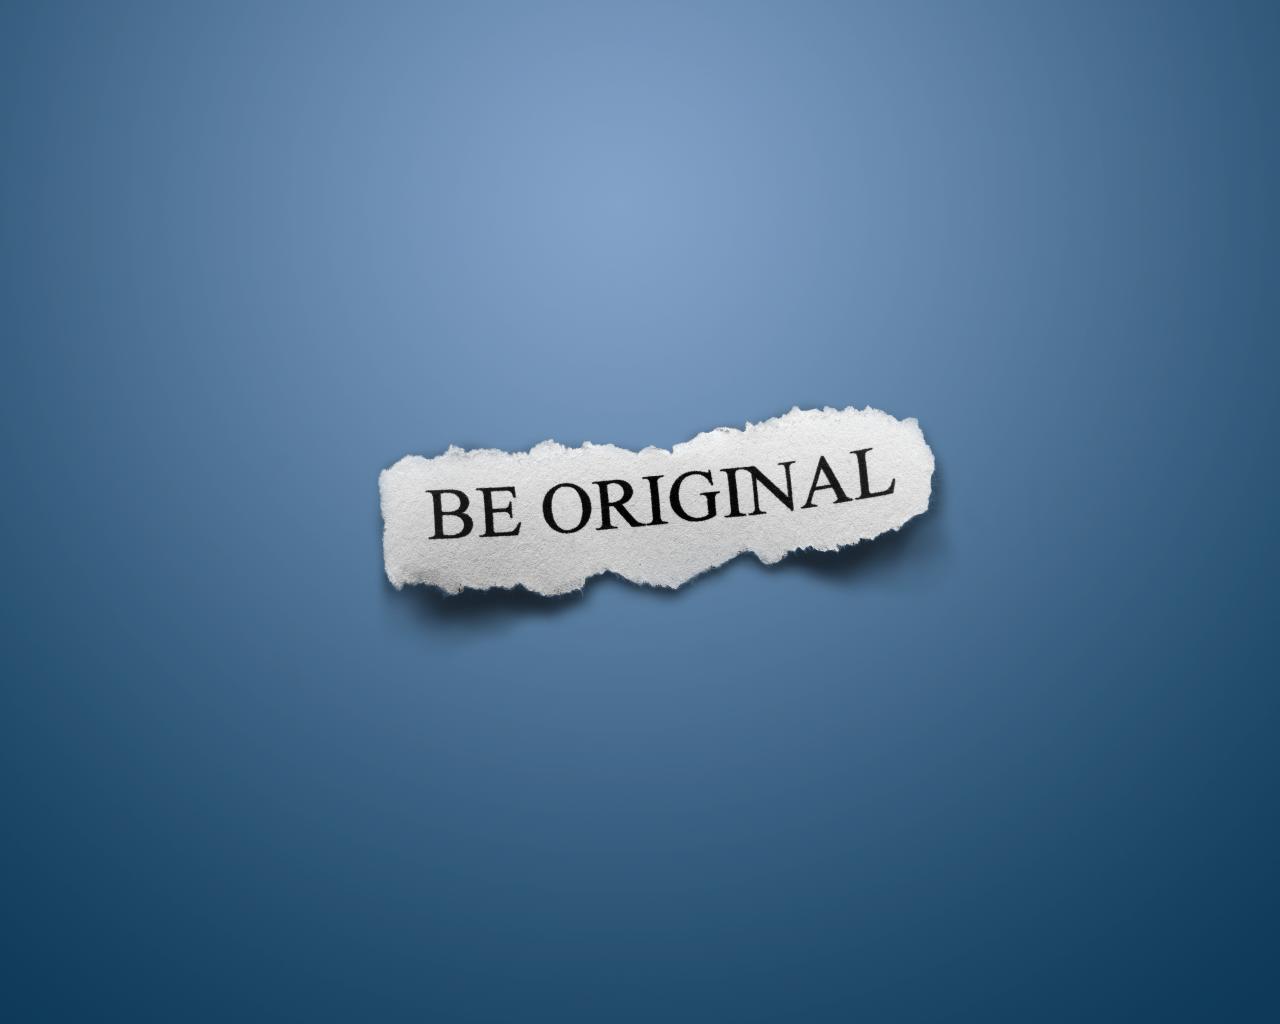 Originality is Not All That Original